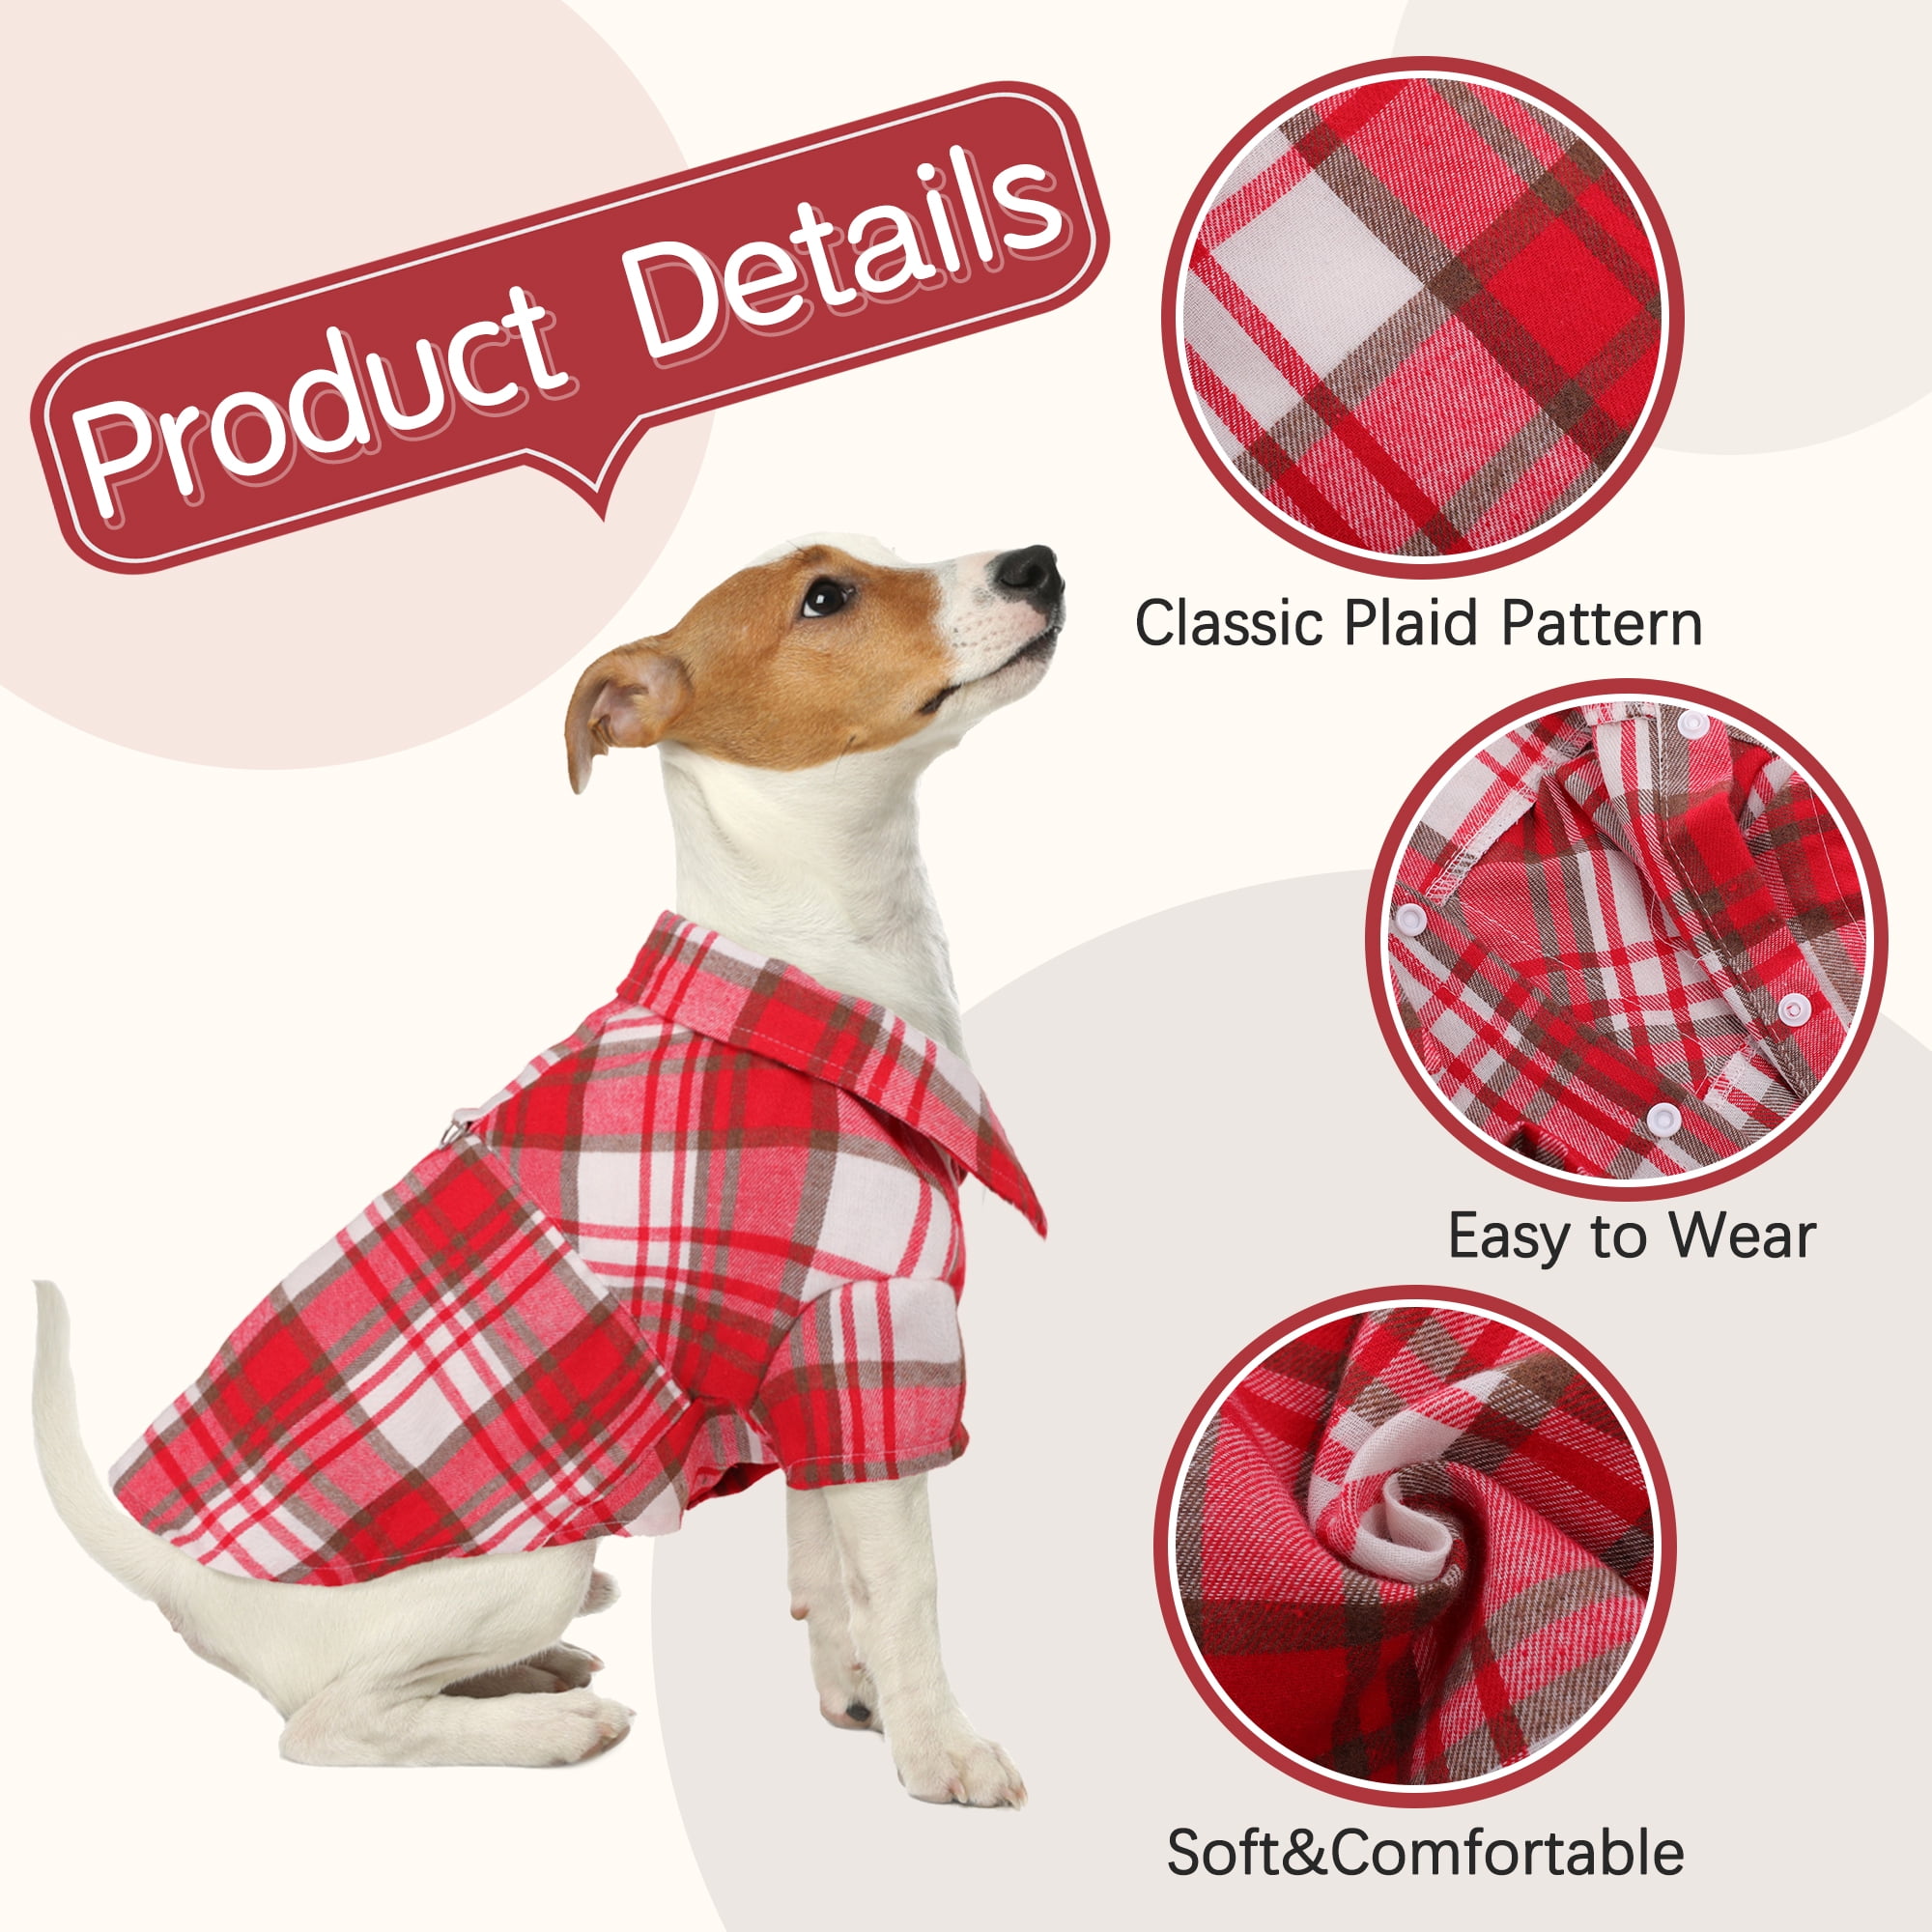 Bulk T-Shirt Wholesale Suppliers - Embroidery and Promotional Products -  Groggy Dog